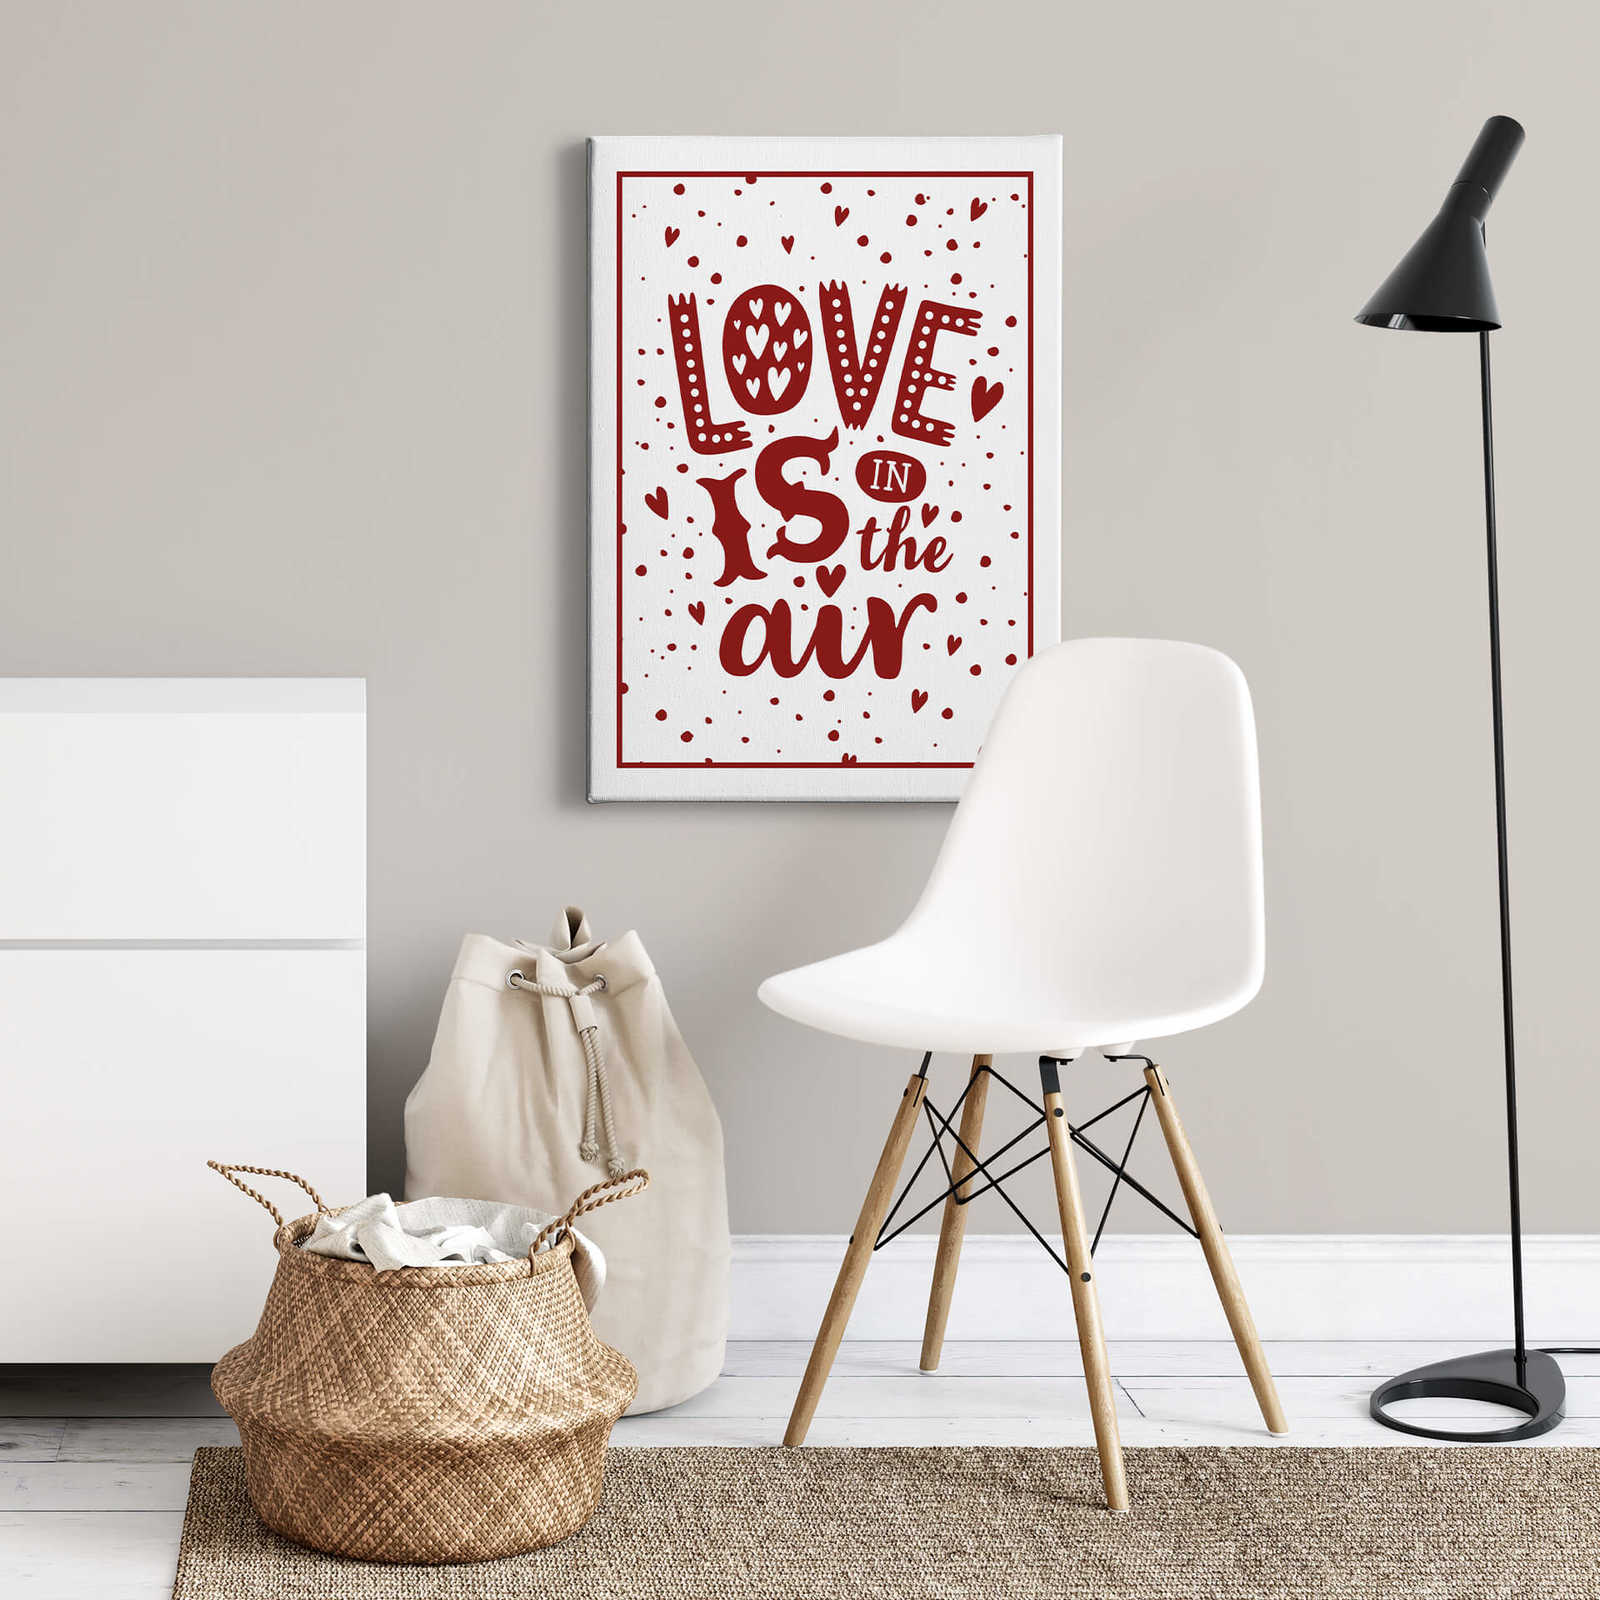             Tableau toile Proverbe love is in the air - 0,50 m x 0,70 m
        